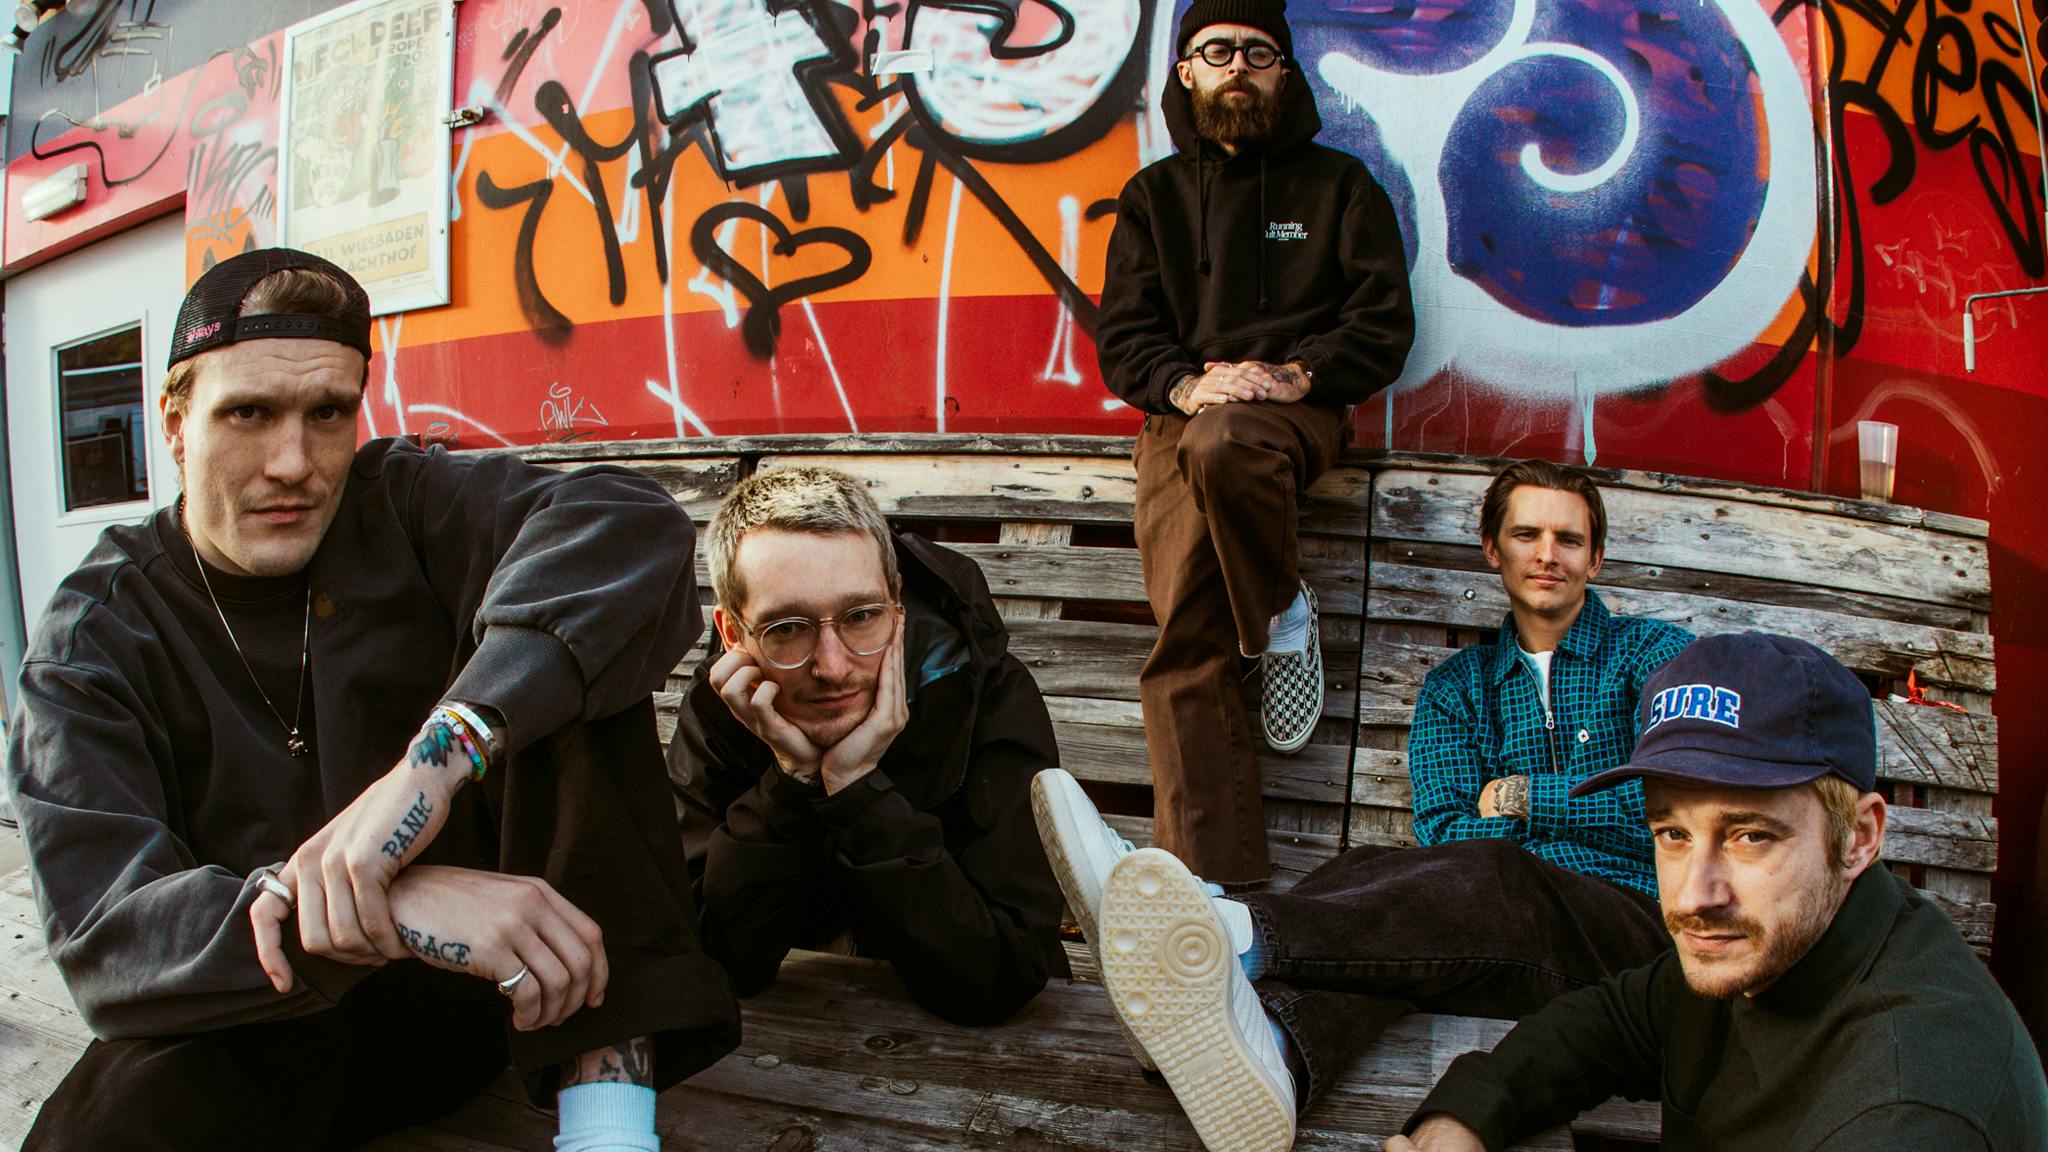 Here’s Neck Deep’s setlist from their 2024 U.S. tour